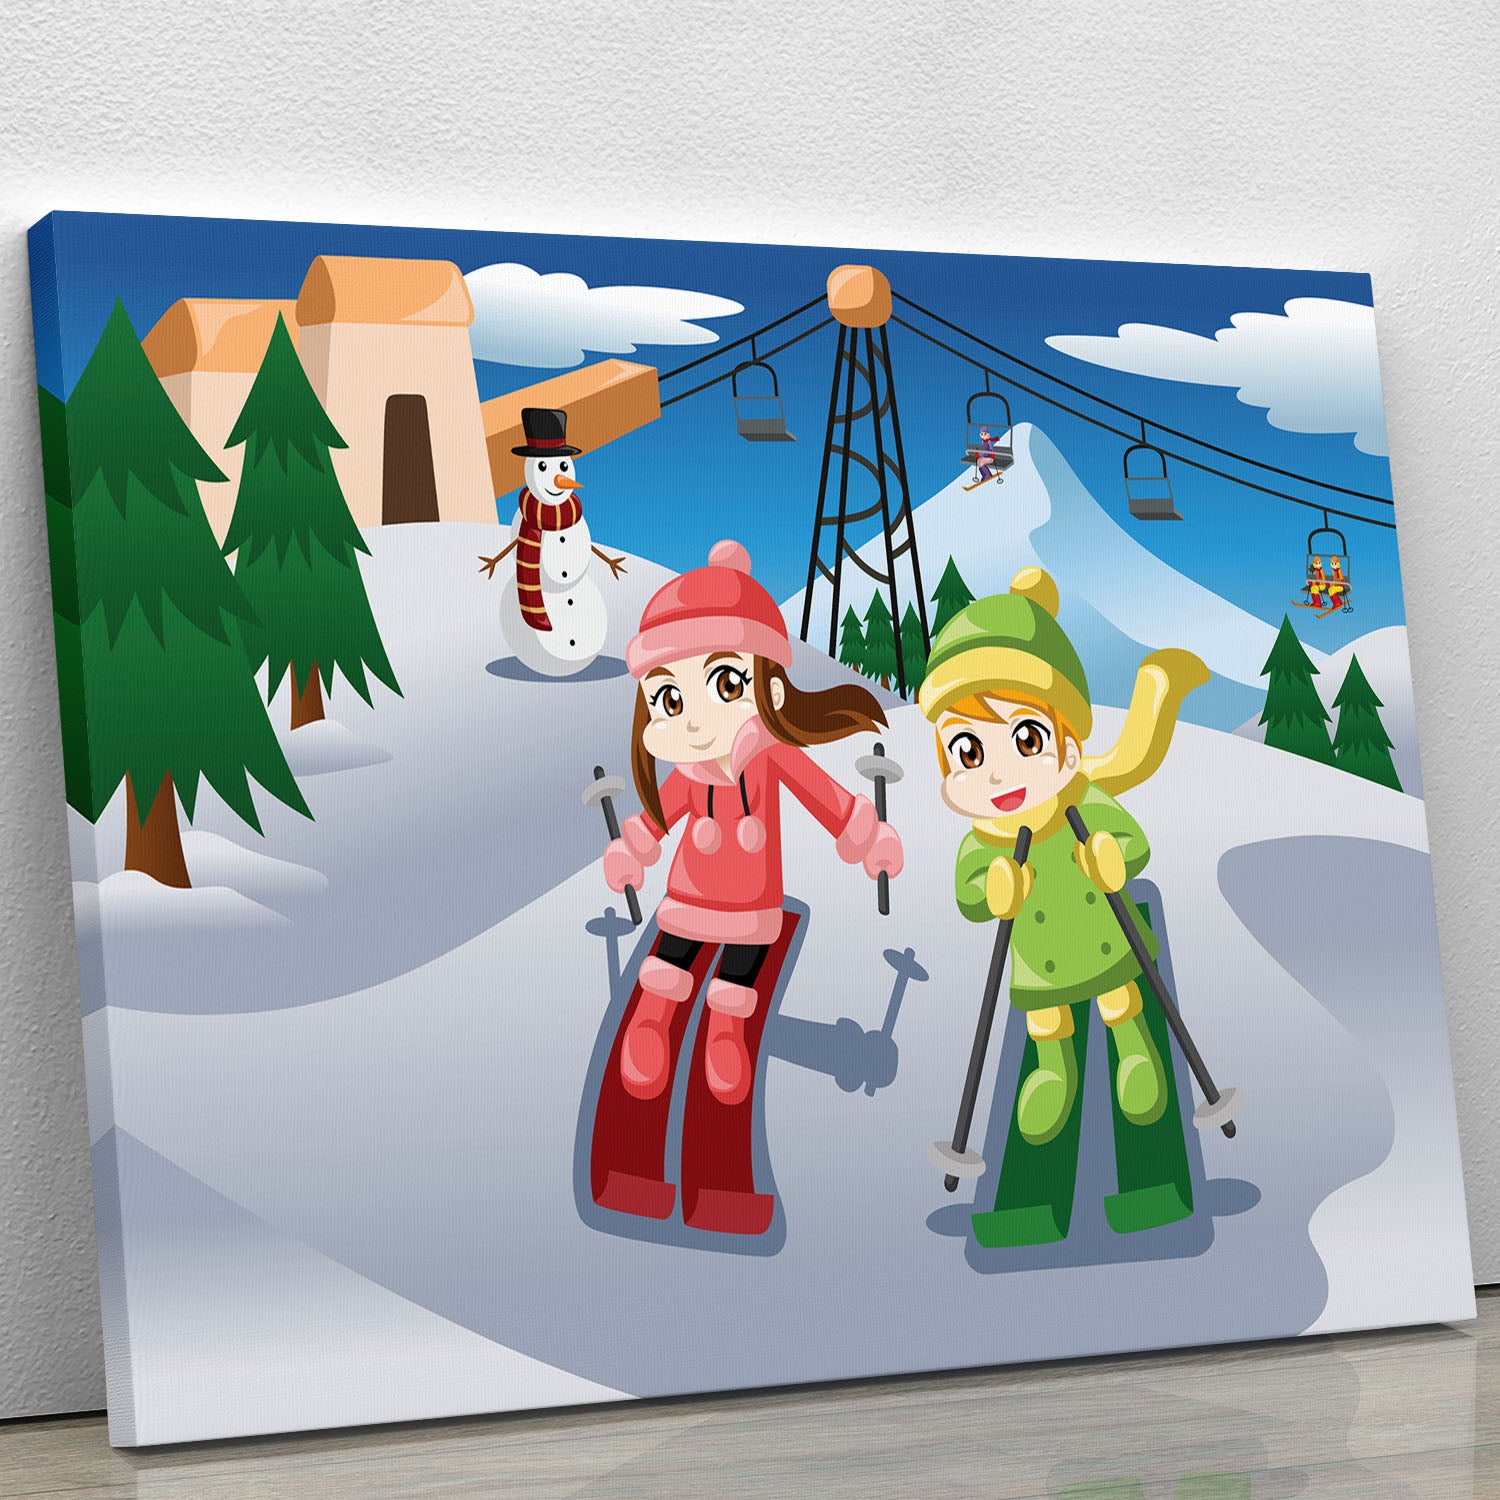 Happy kids skiing together Canvas Print or Poster - Canvas Art Rocks - 1